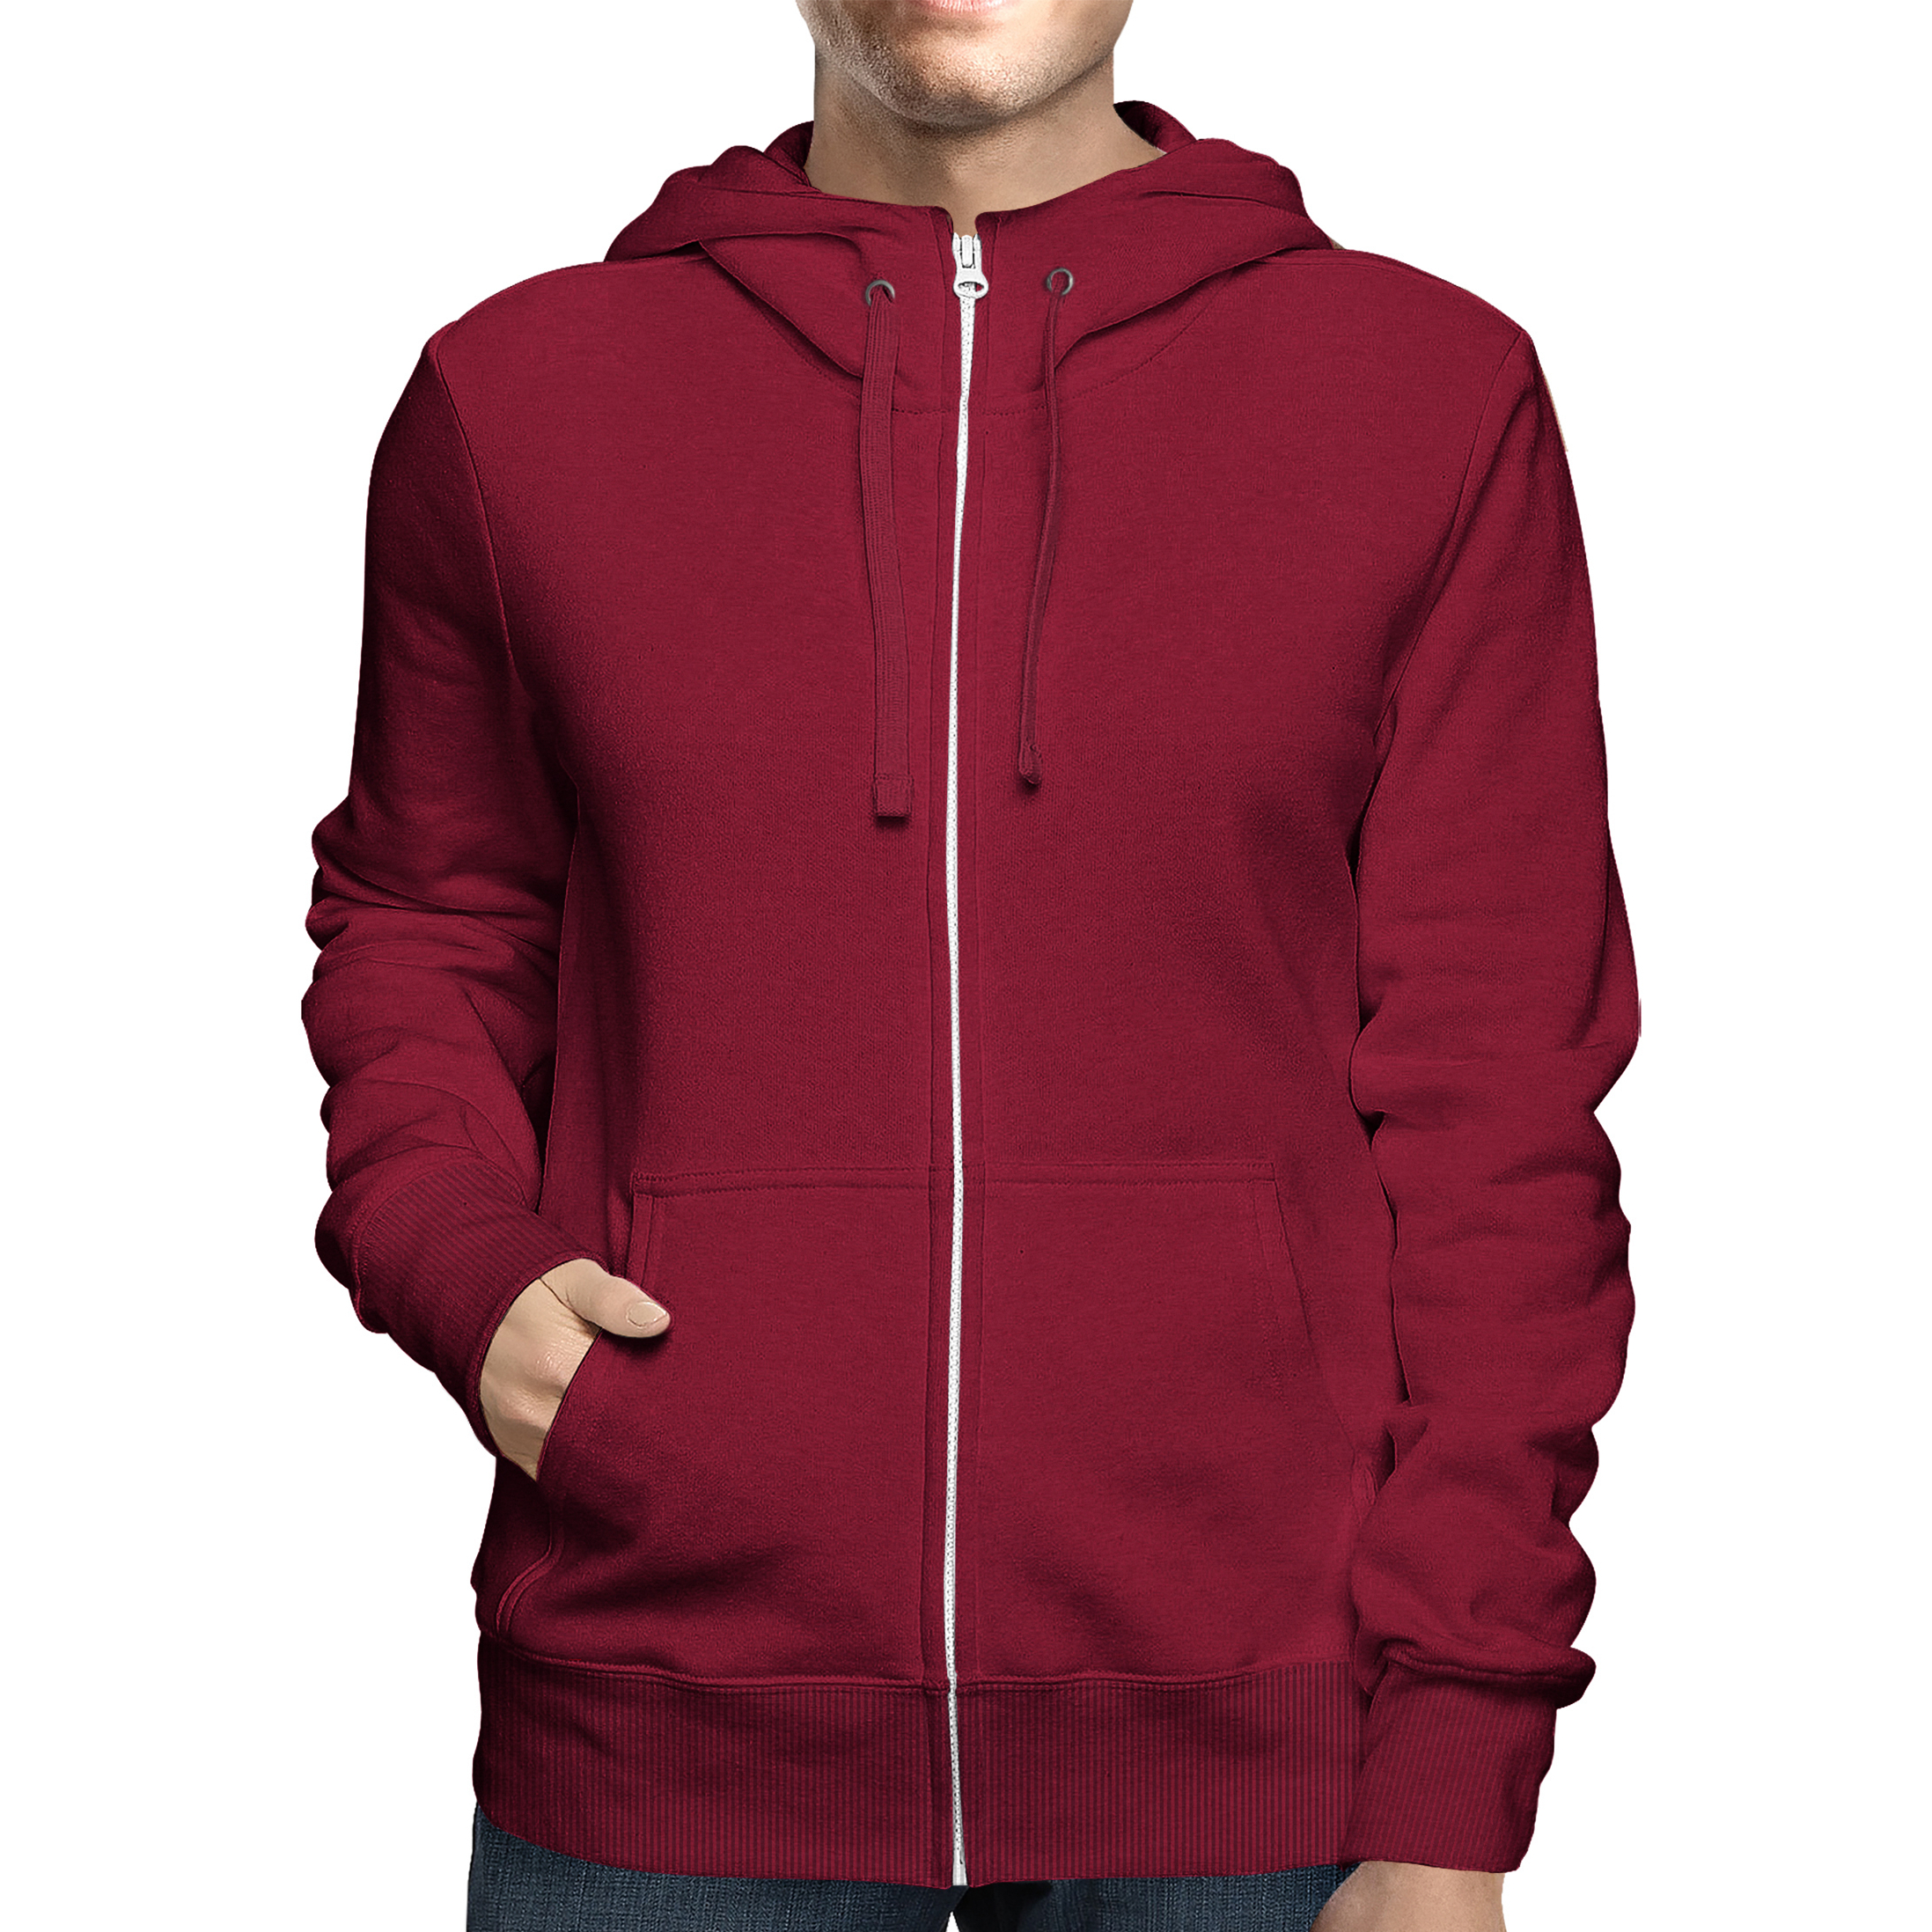 2-Pack: Men's Full Zip Up Fleece-Lined Hoodie Sweatshirt (Big & Tall Size Available) - Burgundy, X-large